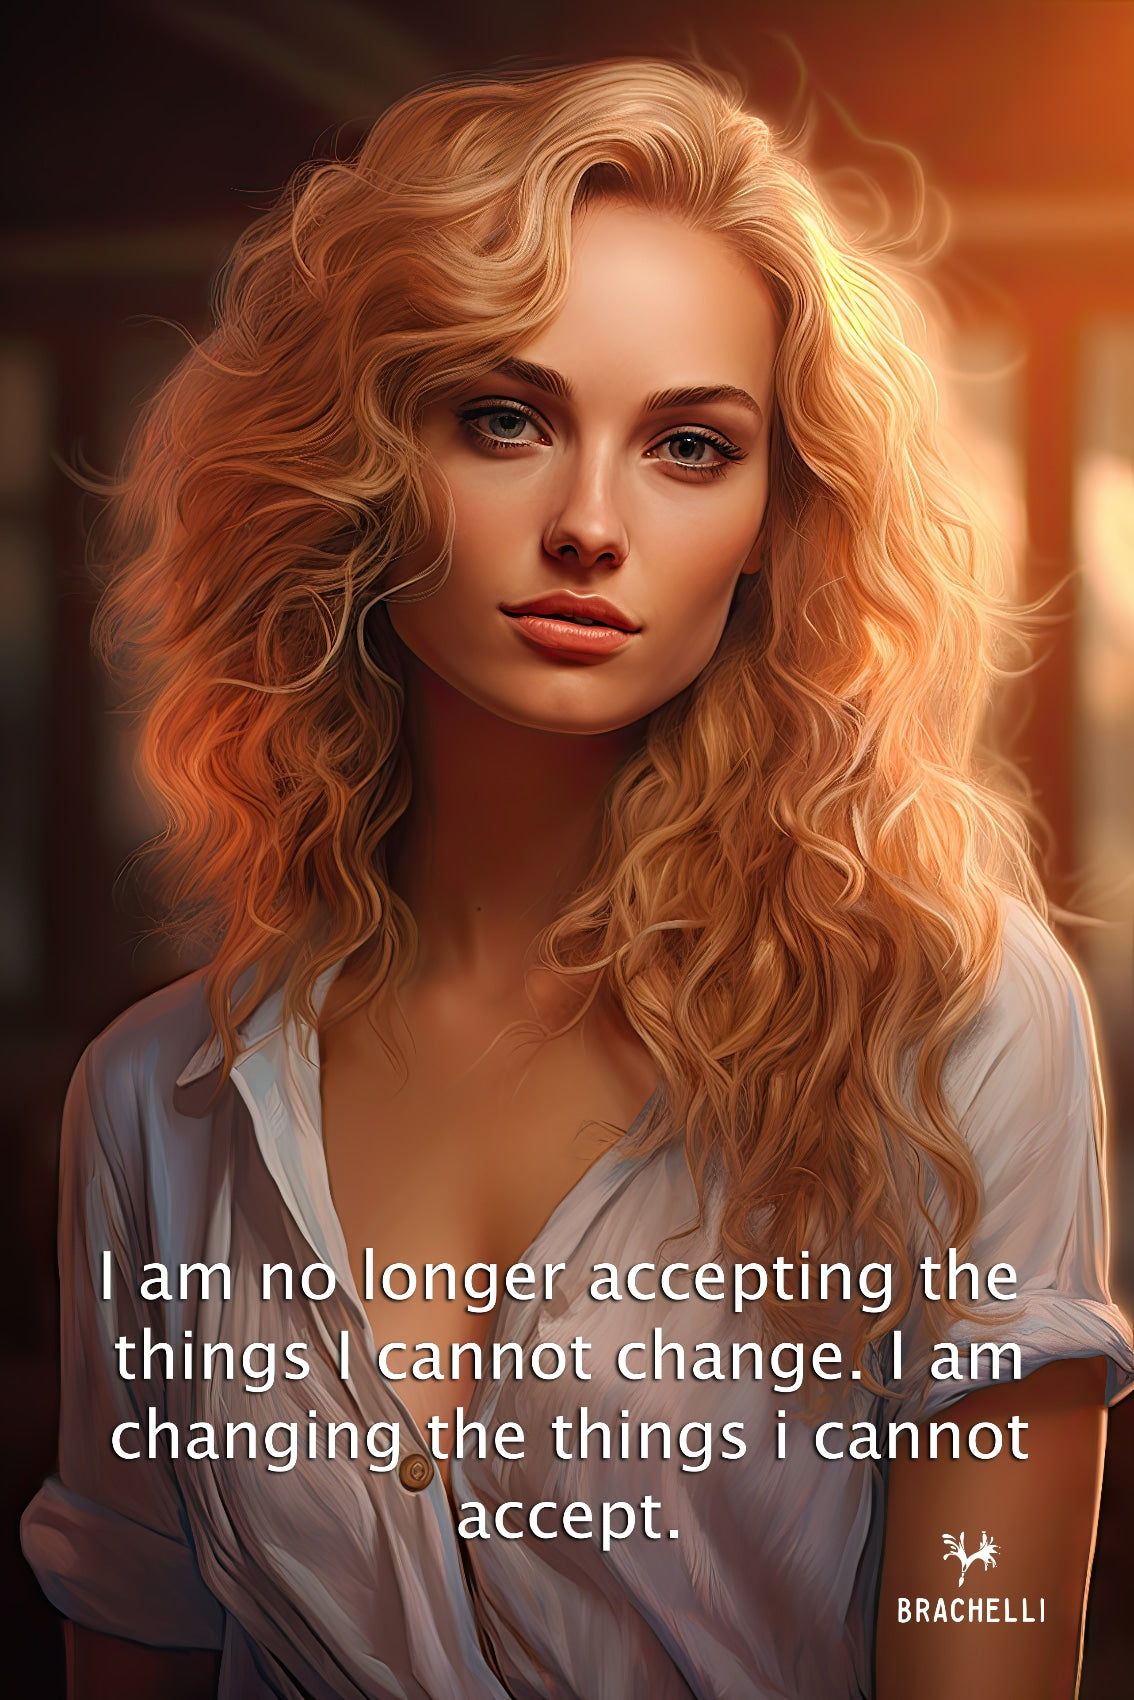 I am no longer accepting the things I cannot change